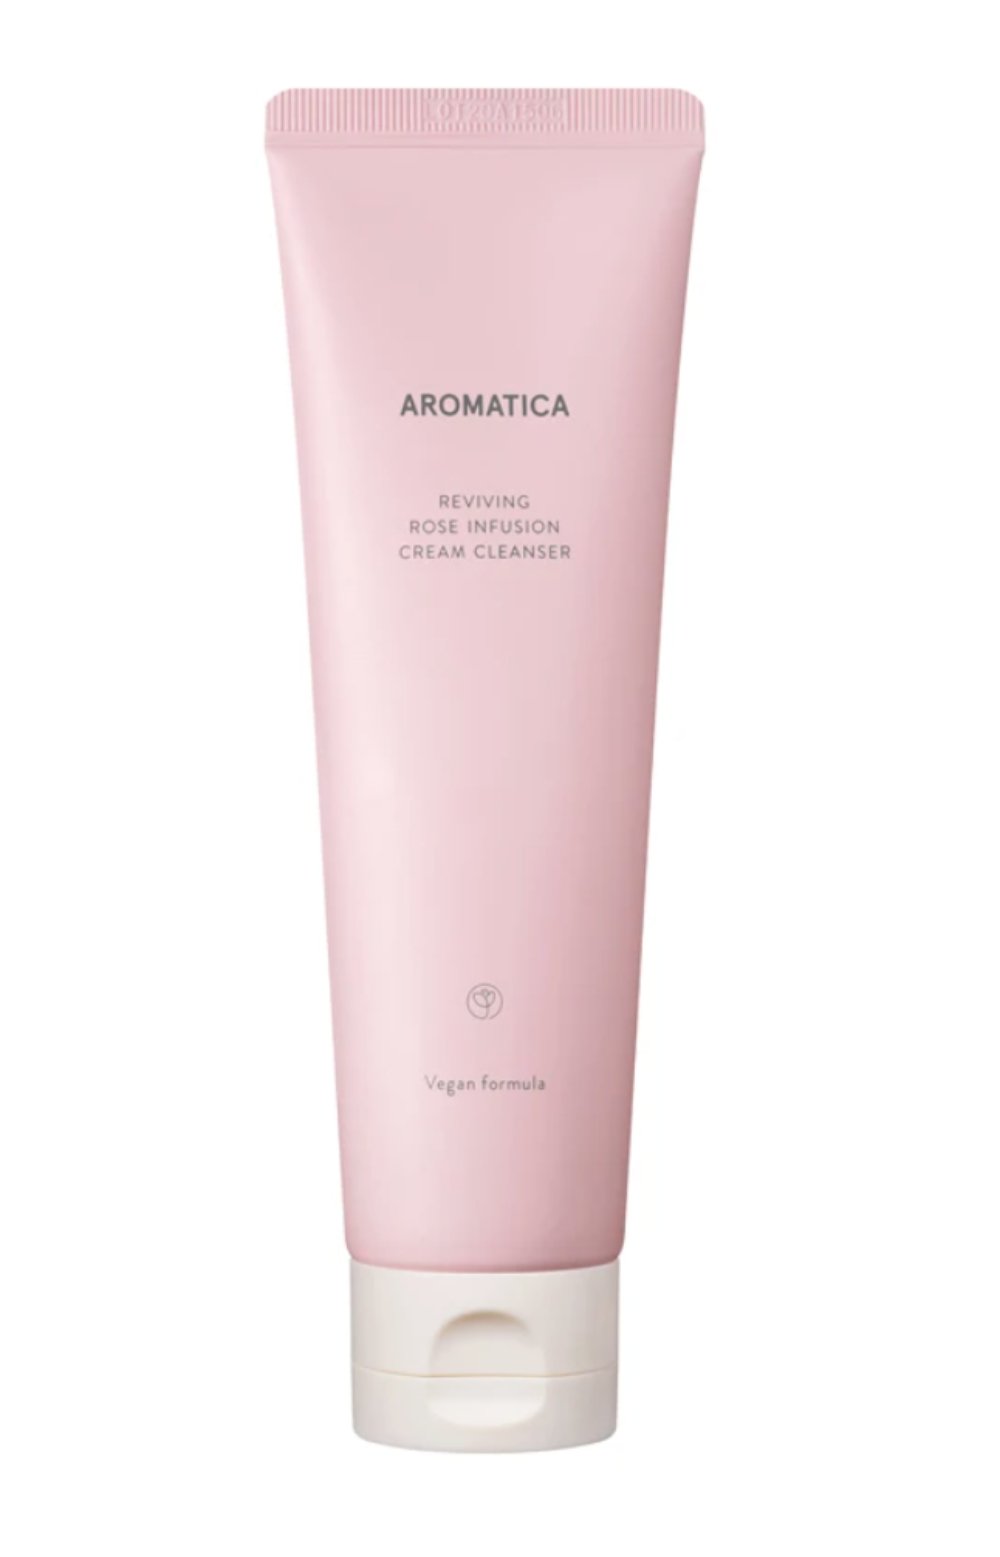 AROMATICA - Reviving Rose Infusion Cream Cleanser 145g - The Face Method